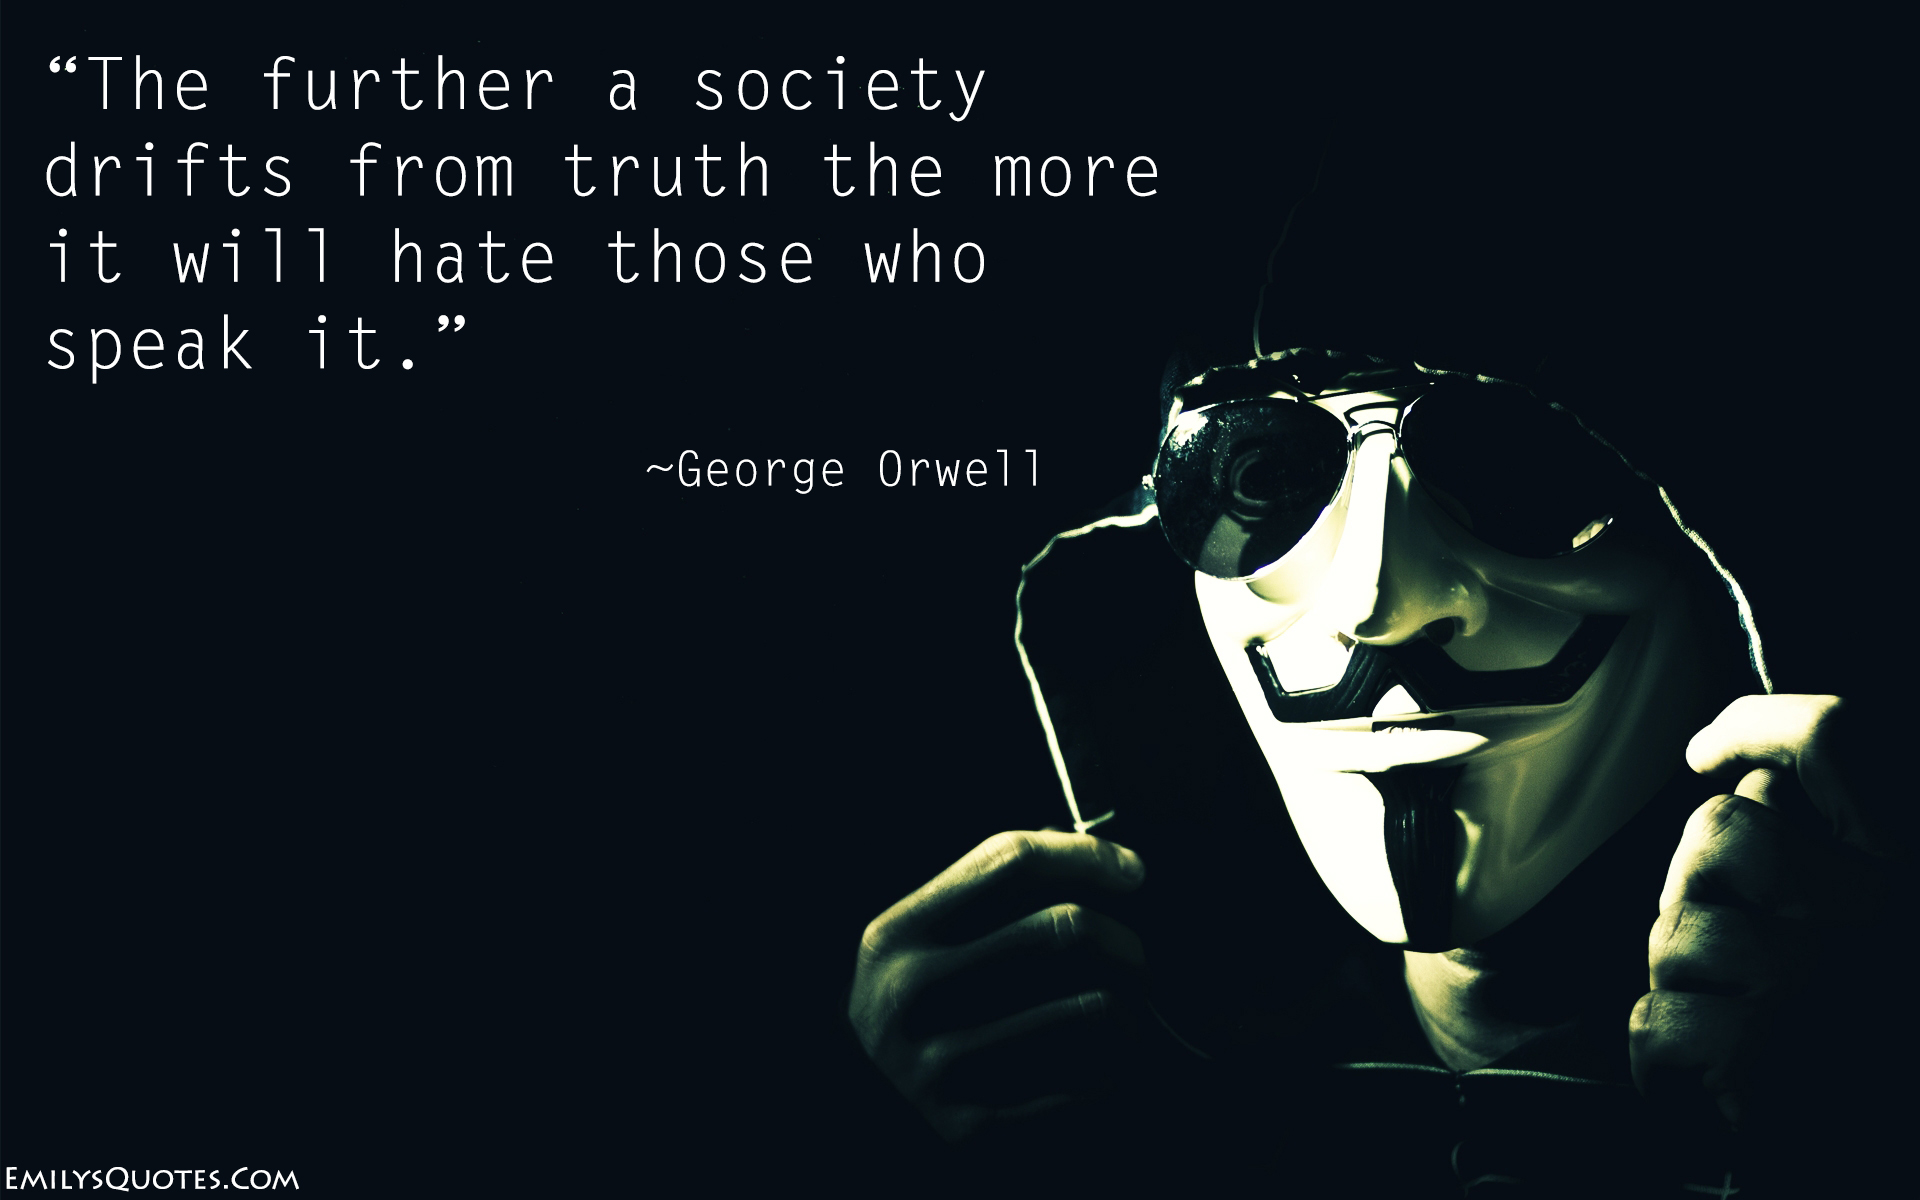 The further a society drifts from truth the more it will hate those who speak it